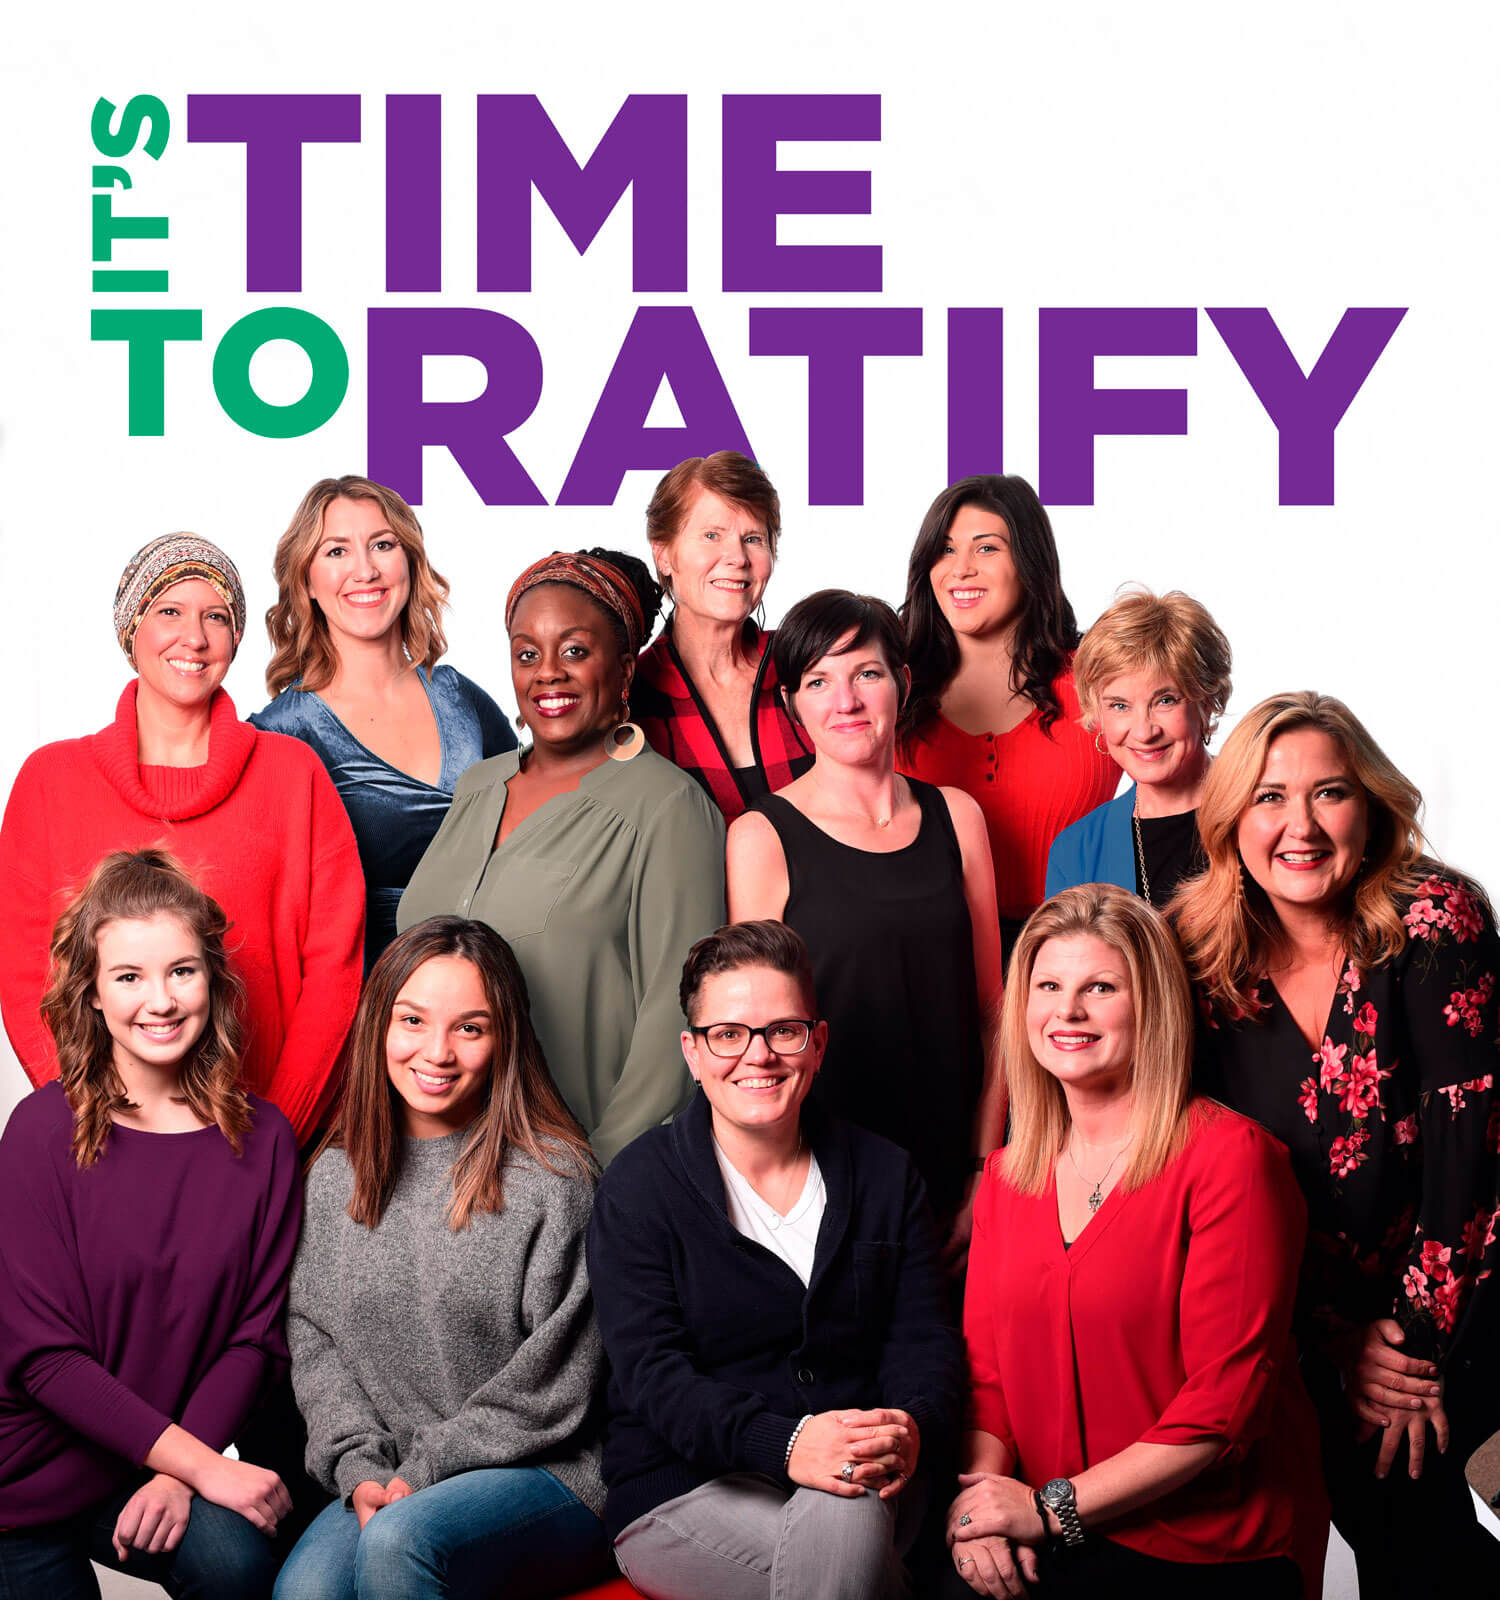 Many diverse women with "It's time to ratify" tet above them